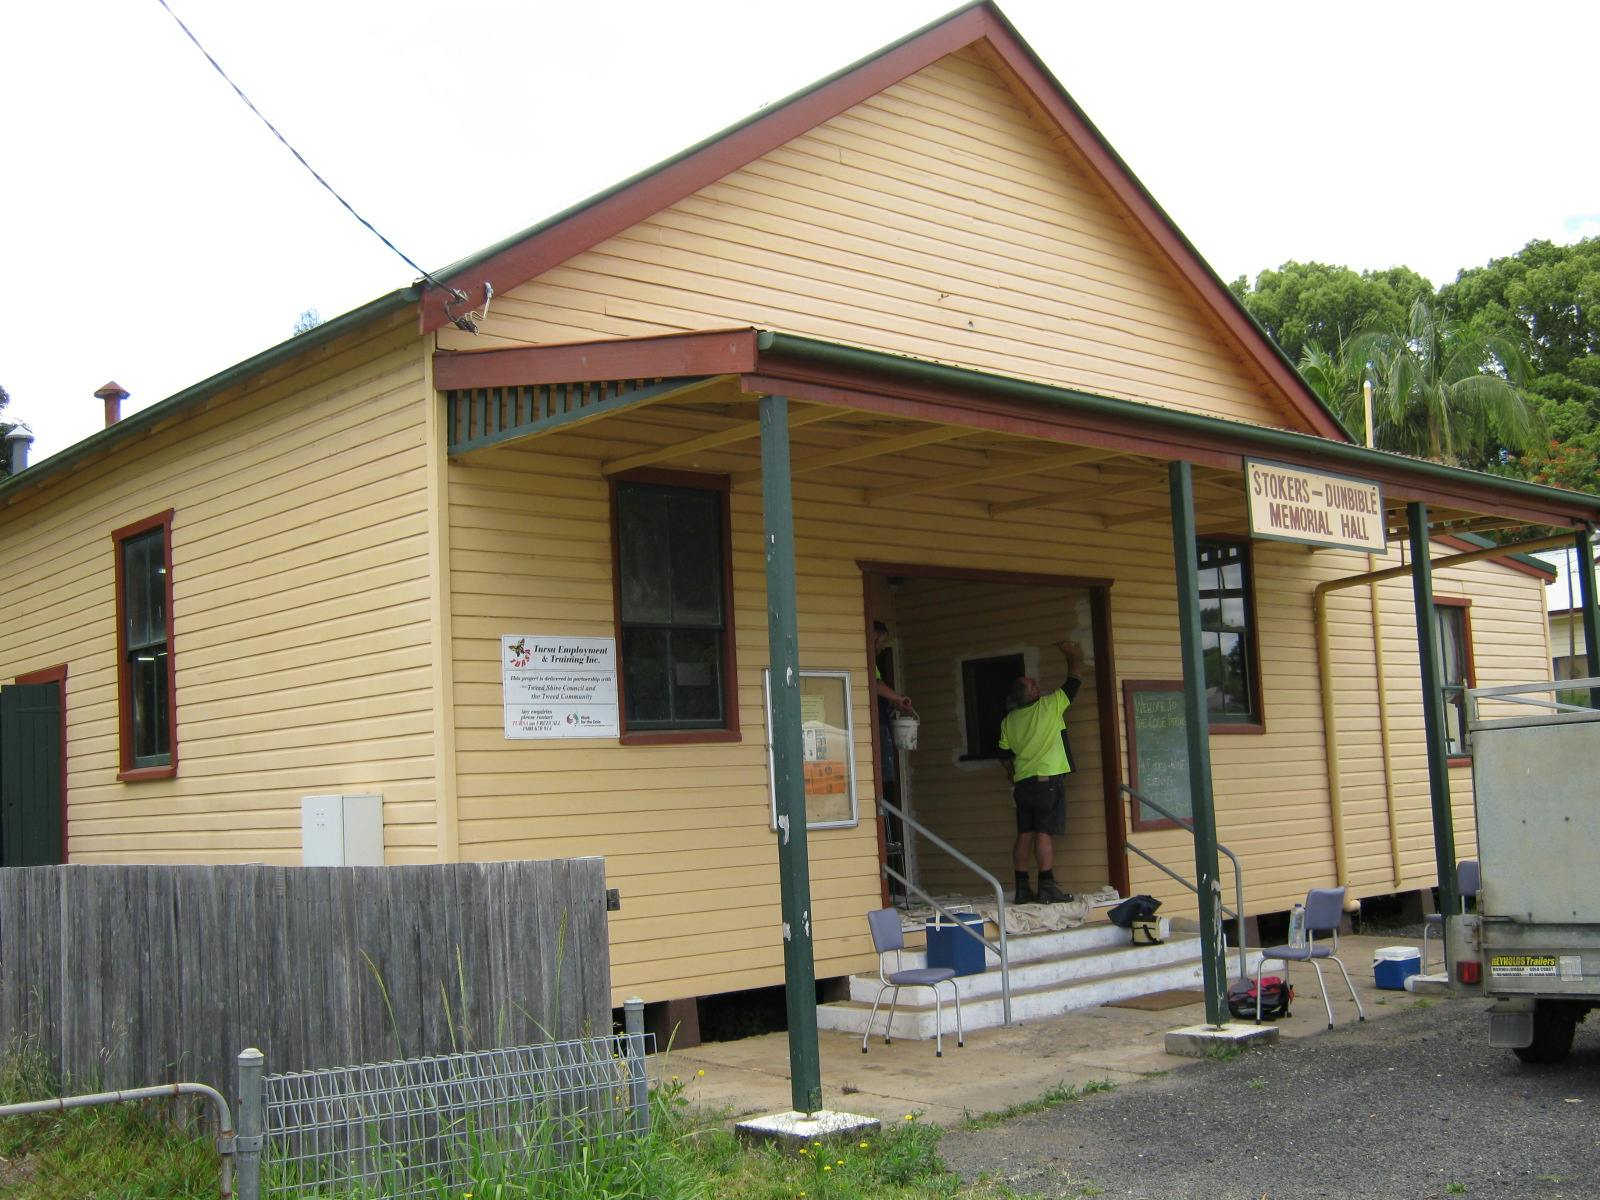 The Stokers - Dunbible Memorial Hall hosts many cultural events in Stokers Siding. 